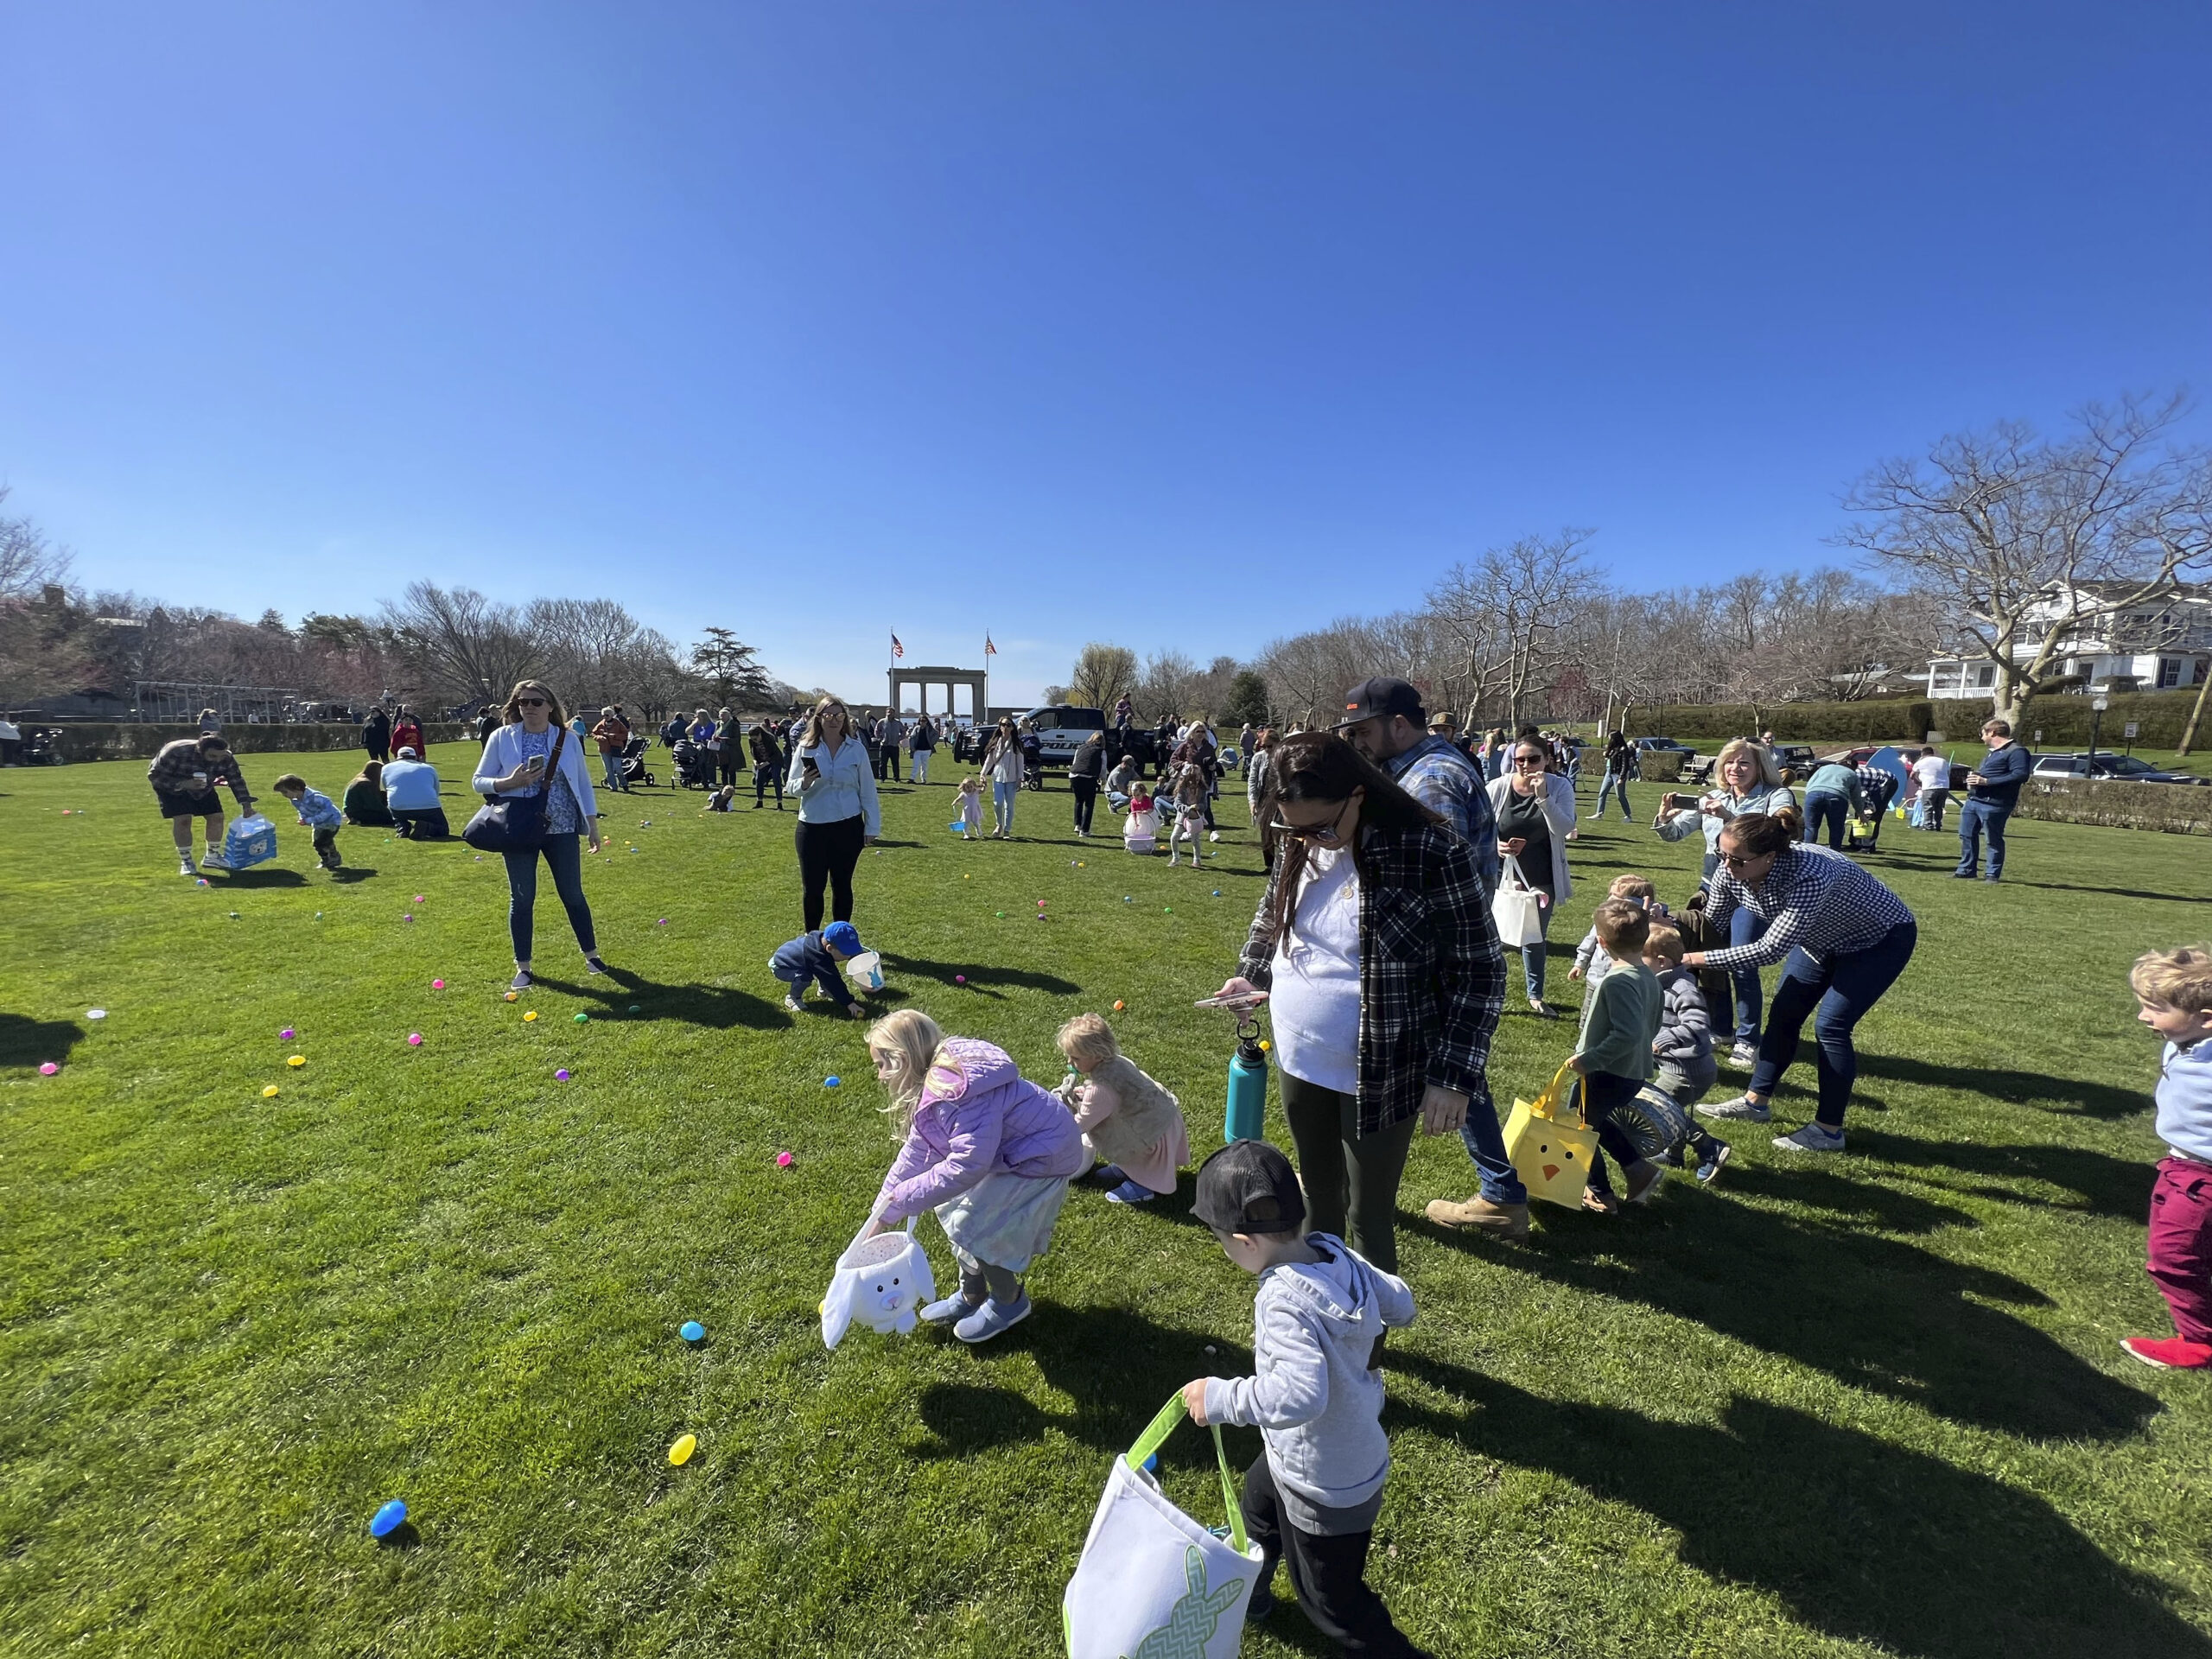 The Southampton village PBA hosted their annual Easter egg hunt on Friday morning in Agawam Park.   DANA SHAW